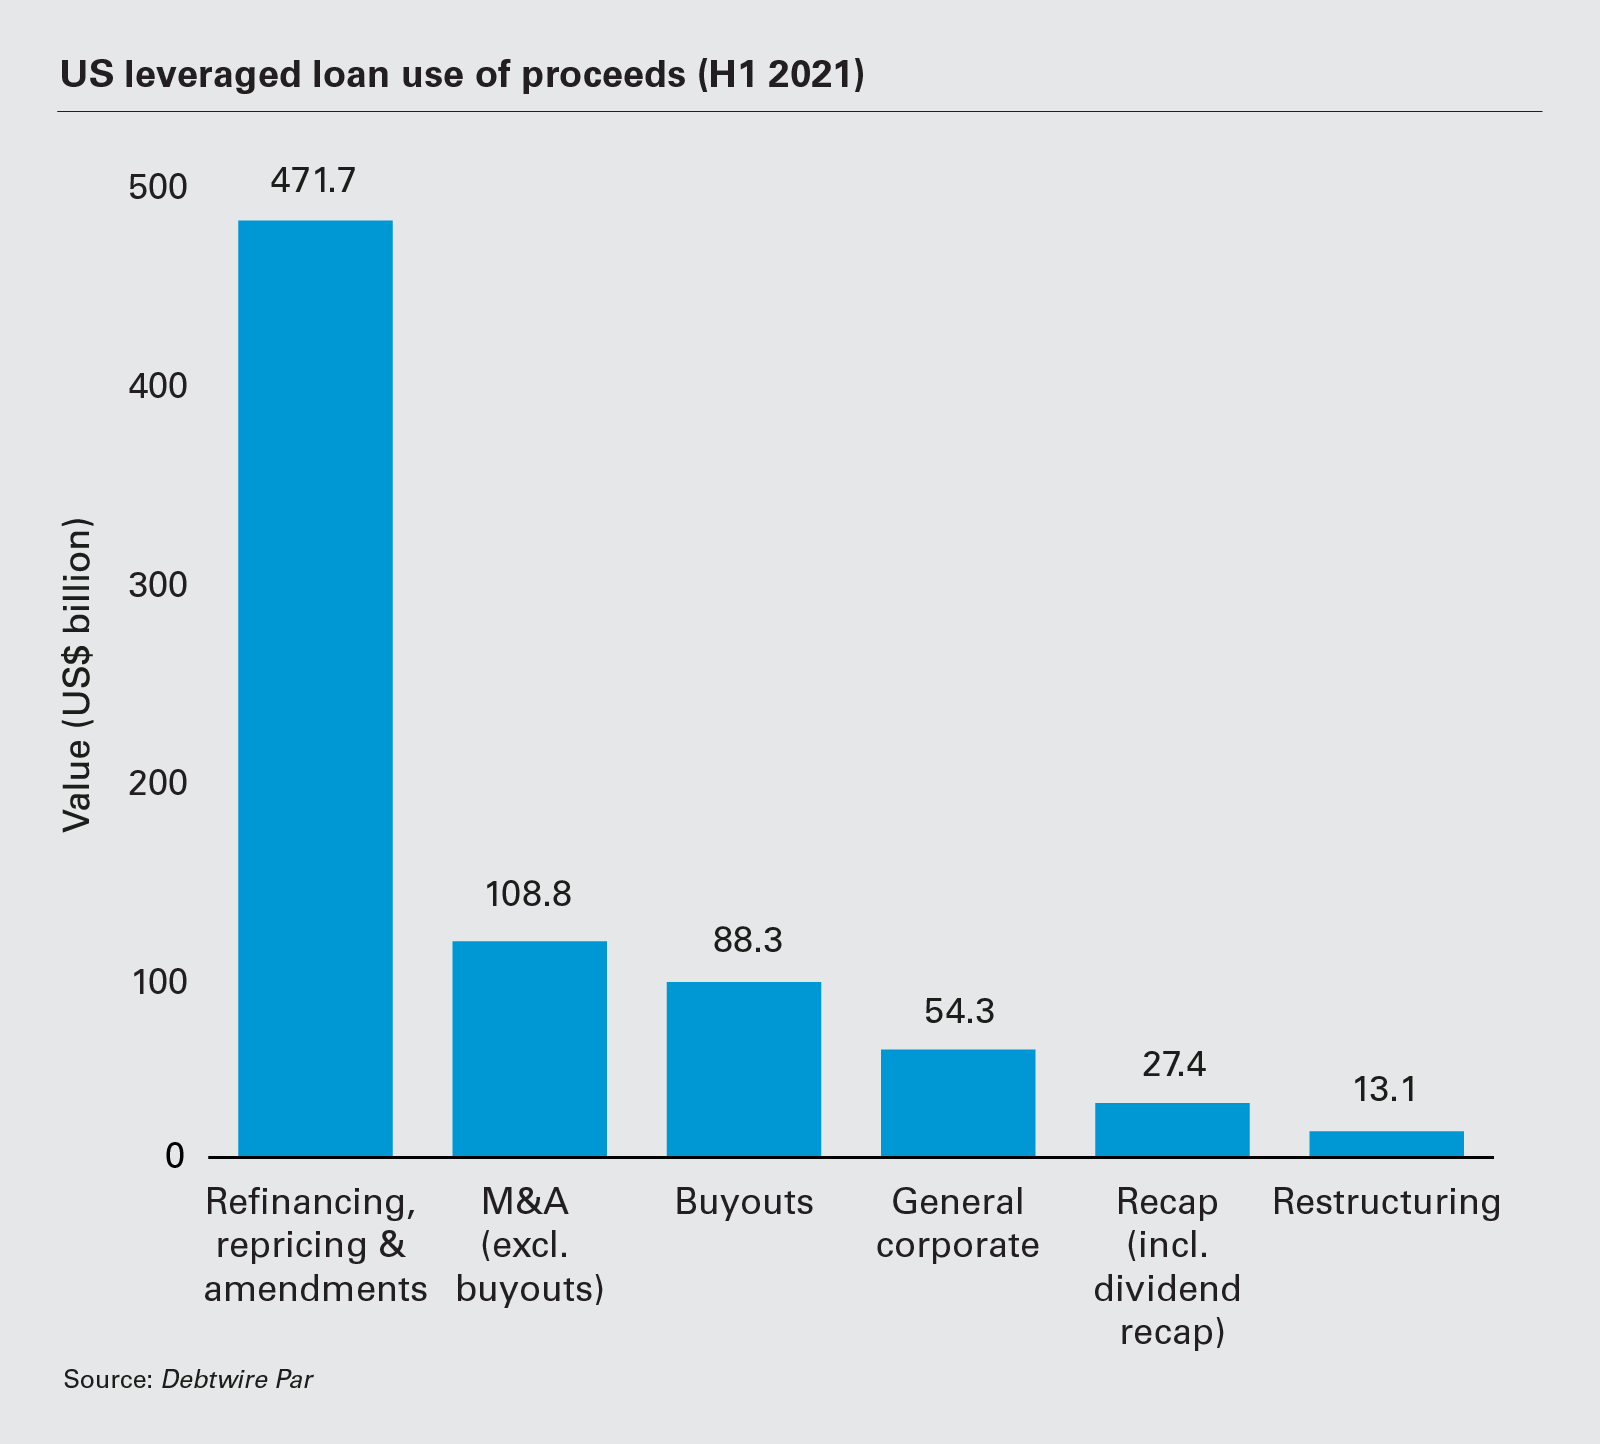 US leveraged loan use of proceeds (H1 2021)